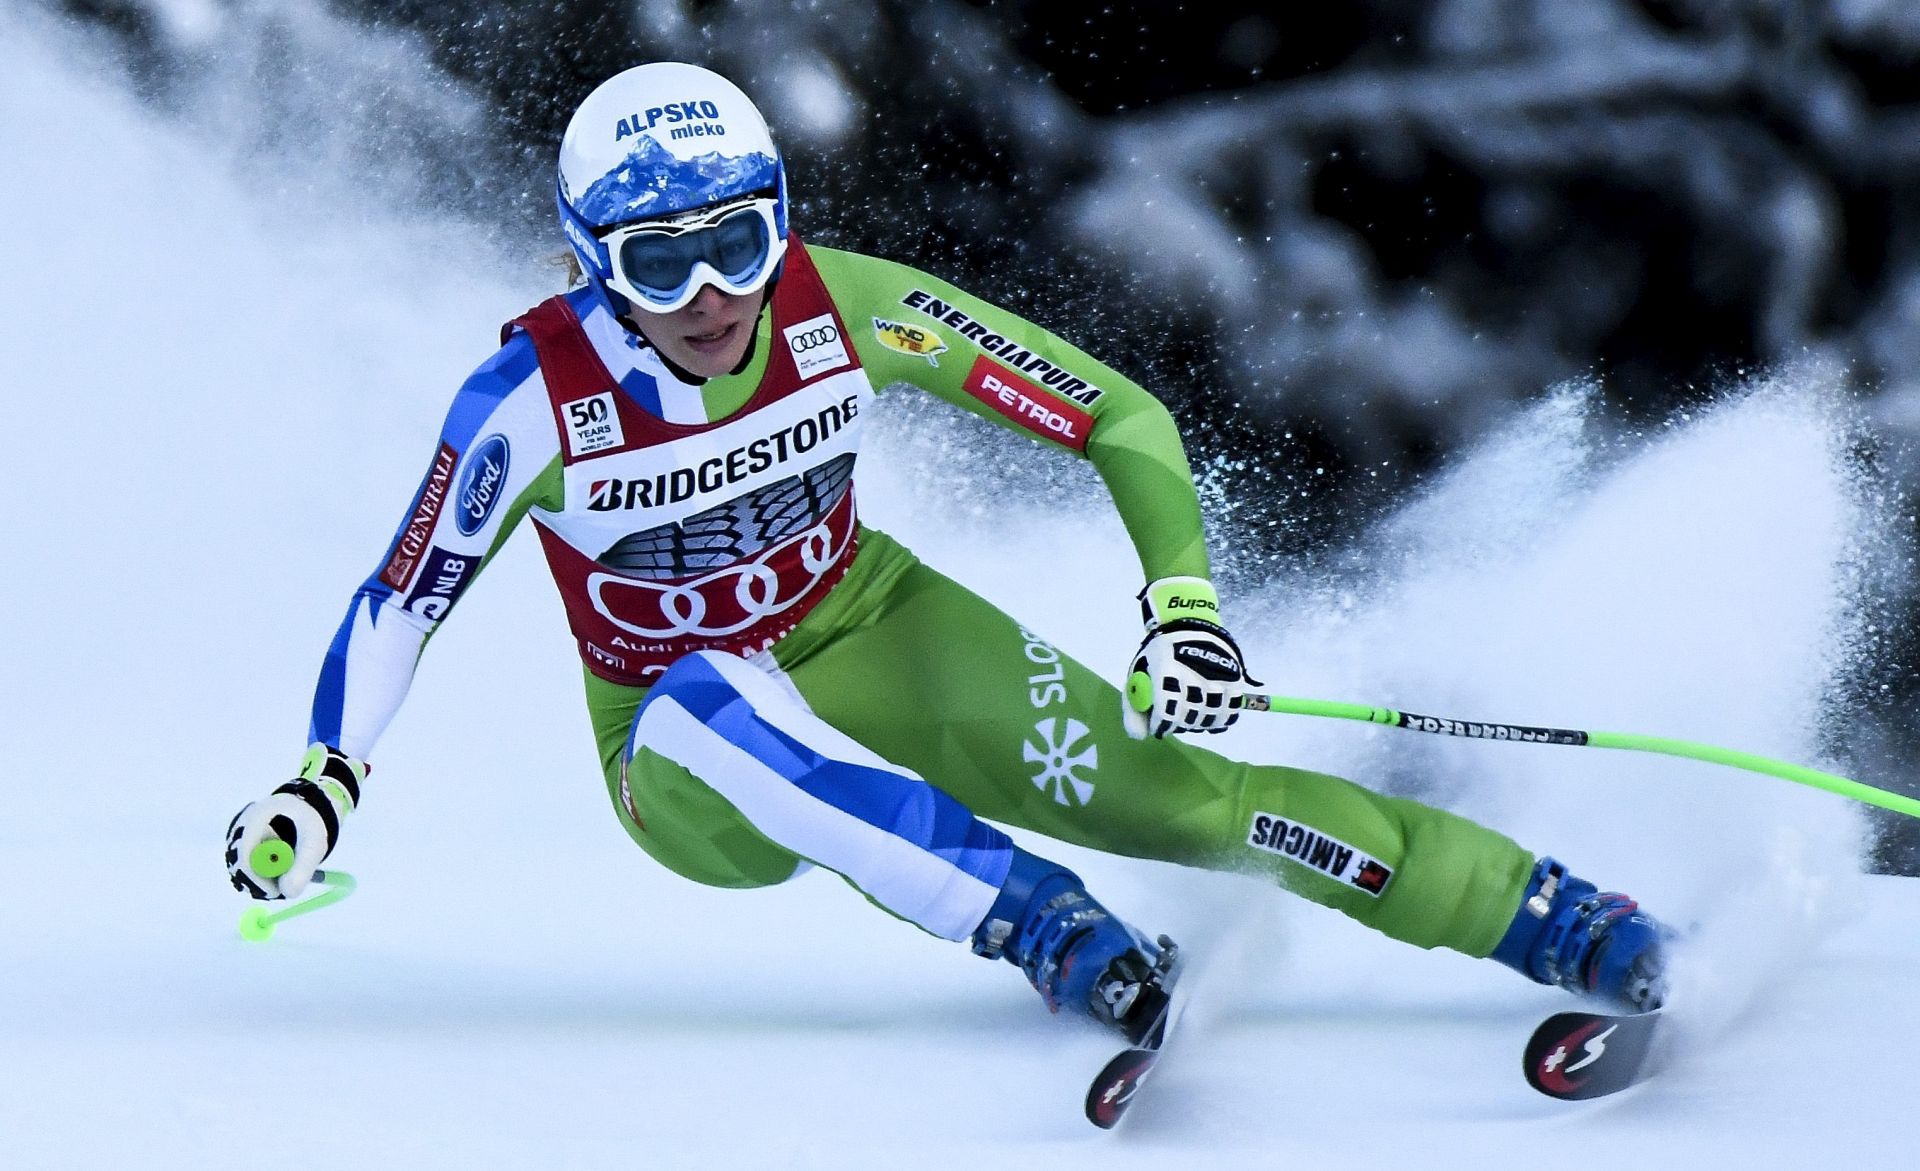 epa05738122 Overall worldcup leader Ilka Stuhec of Slovenia in action during the women's downhill race of the FIS Alpine Ski World Cup season in Garmisch-Partenkirchen, Germany, 21 January 2017.  EPA/PHILIPP GUELLAND